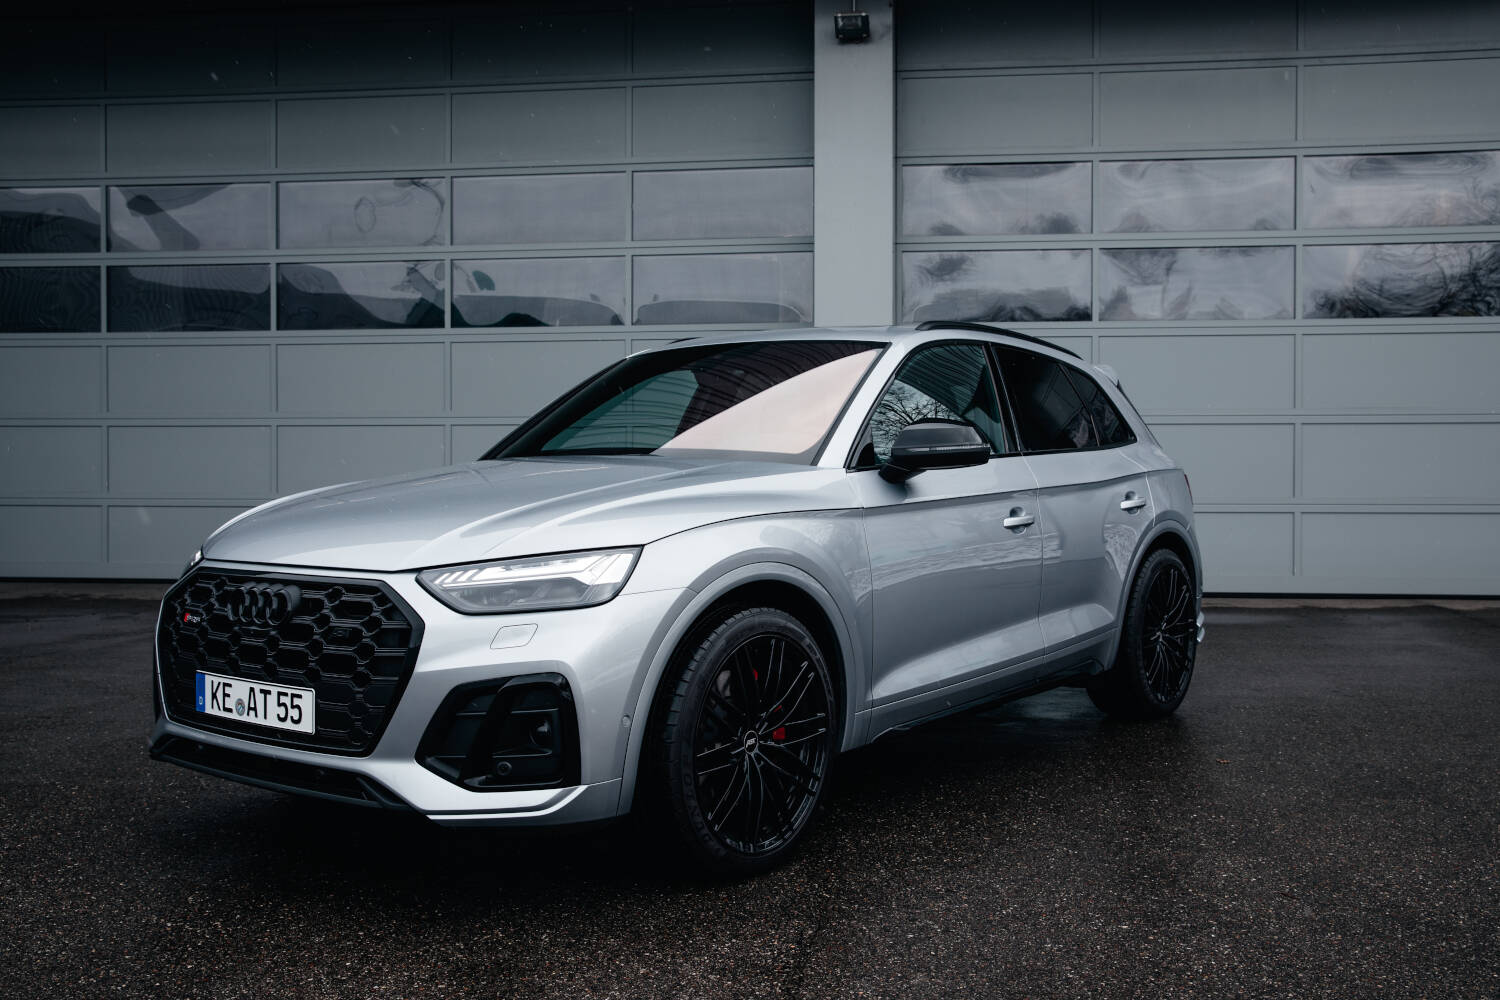 The 384 HP SQ5 a cool eyecatcher with the rear skirt set